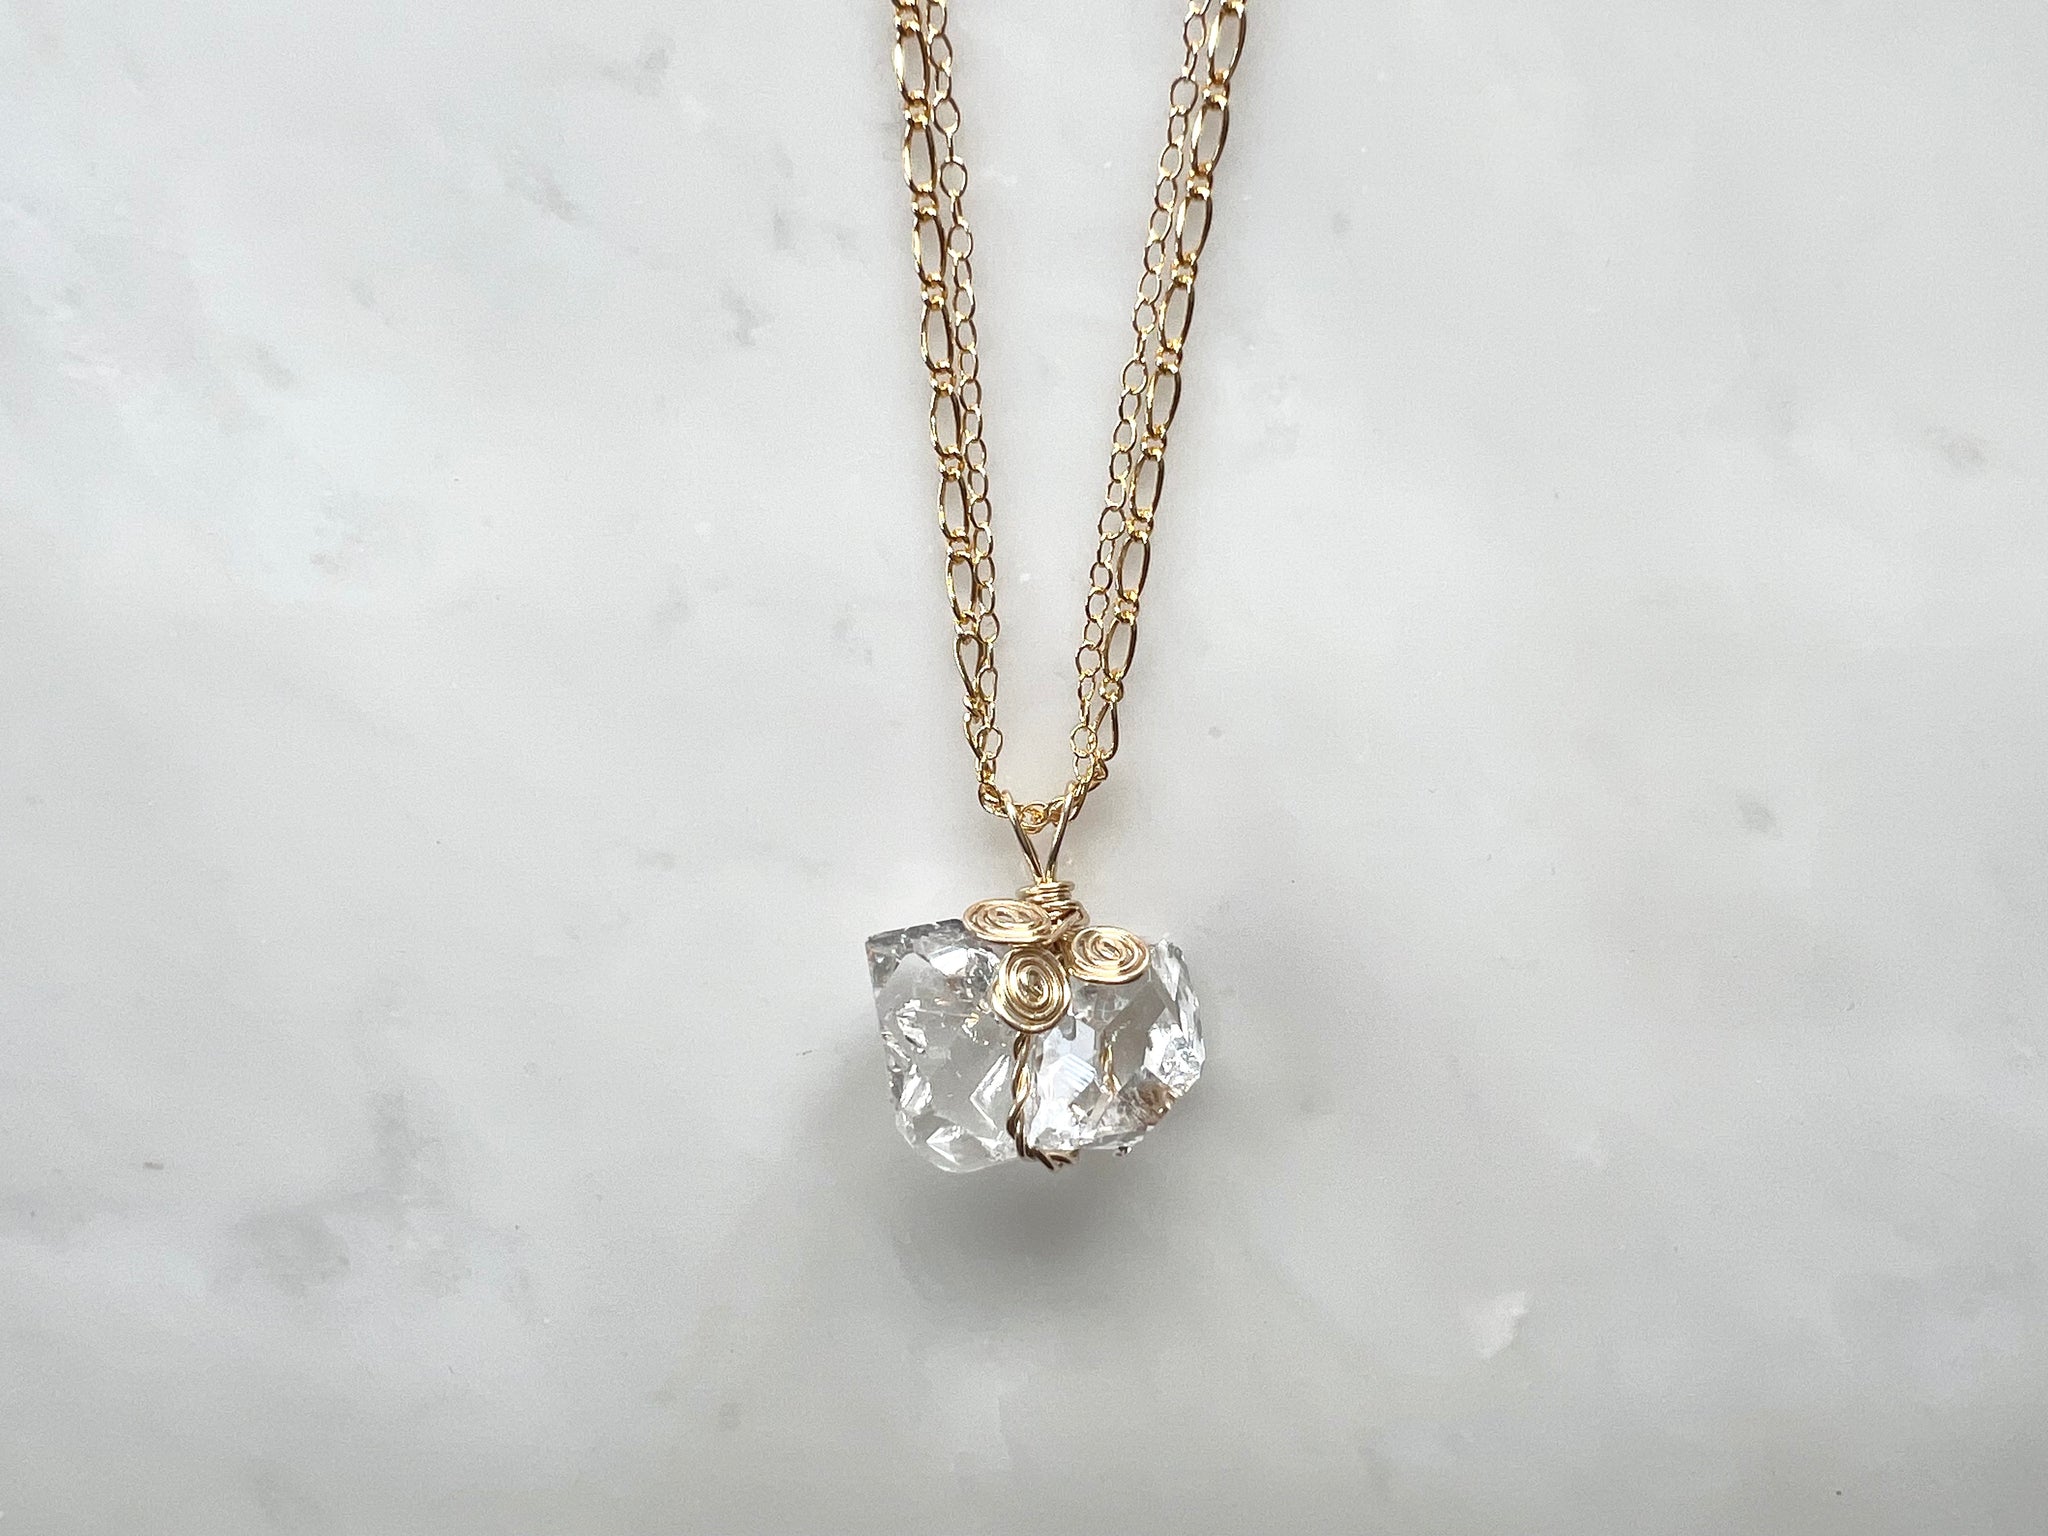 #2 Herkimer Diamond Cluster Small Necklace 14K Gold Filled / ハーキマーダイアモンド　クラスター　小　ネックレス　14K ゴールドフィルド